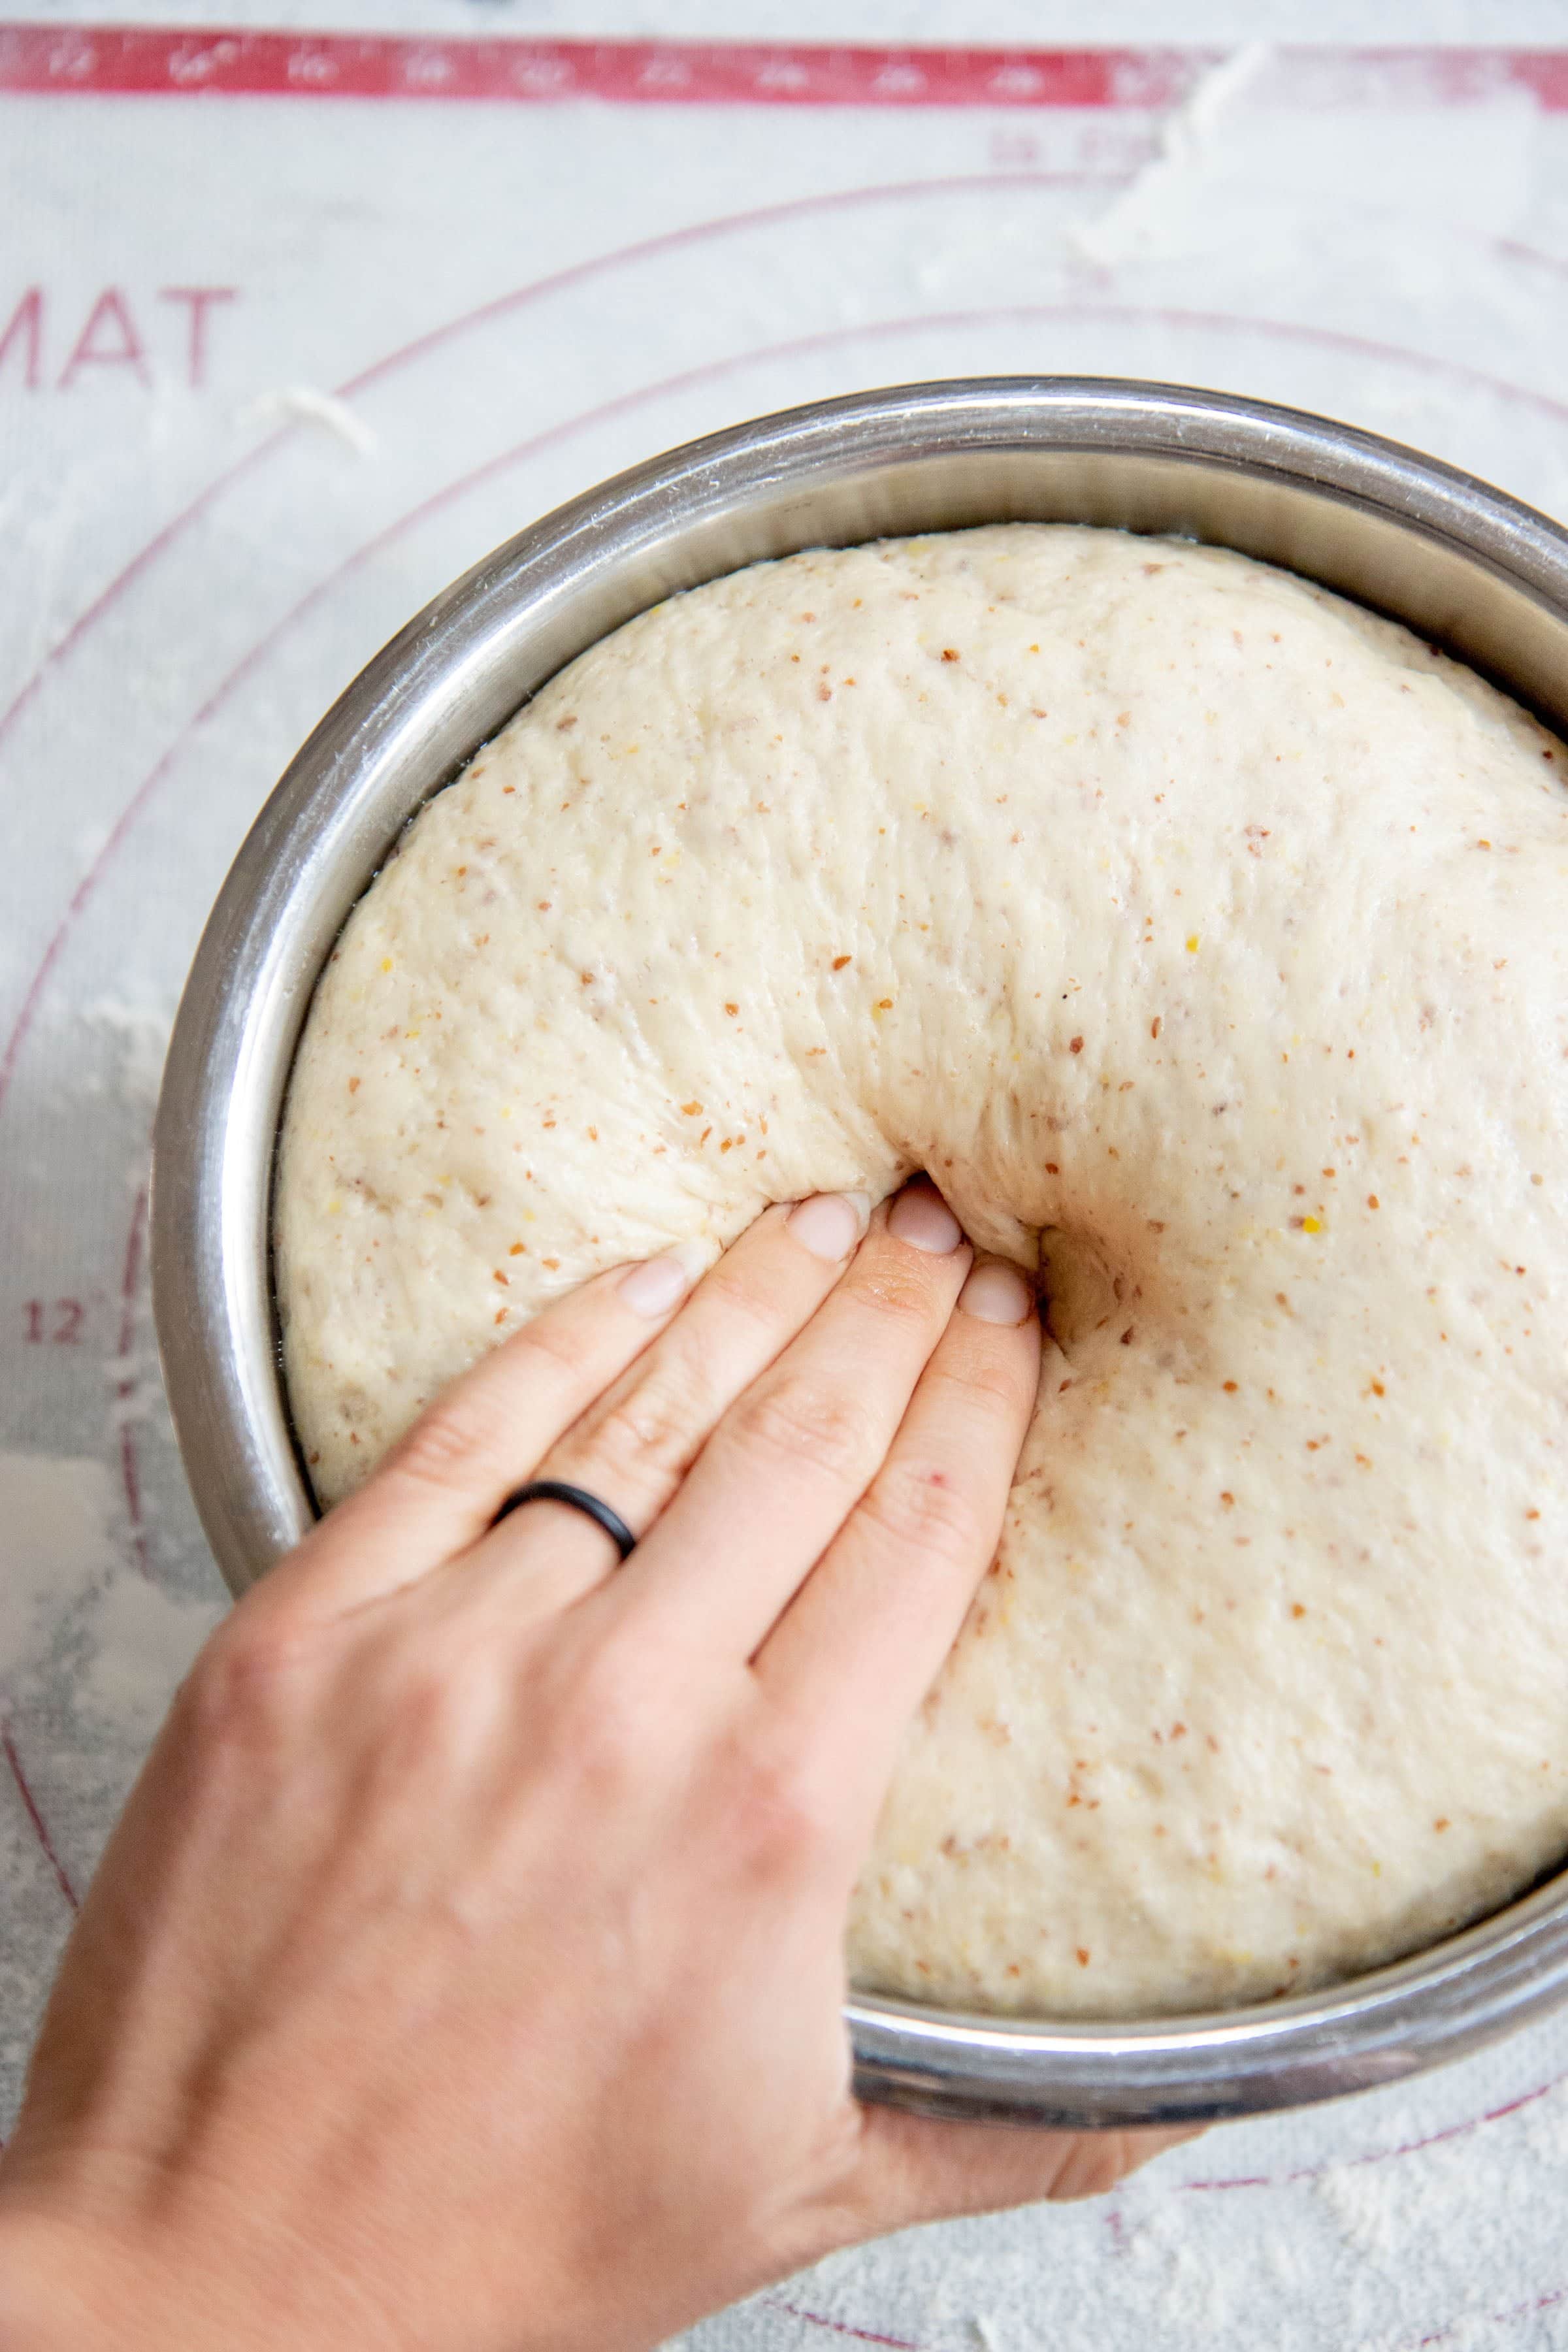 Hand pressing into dough to check the rise.